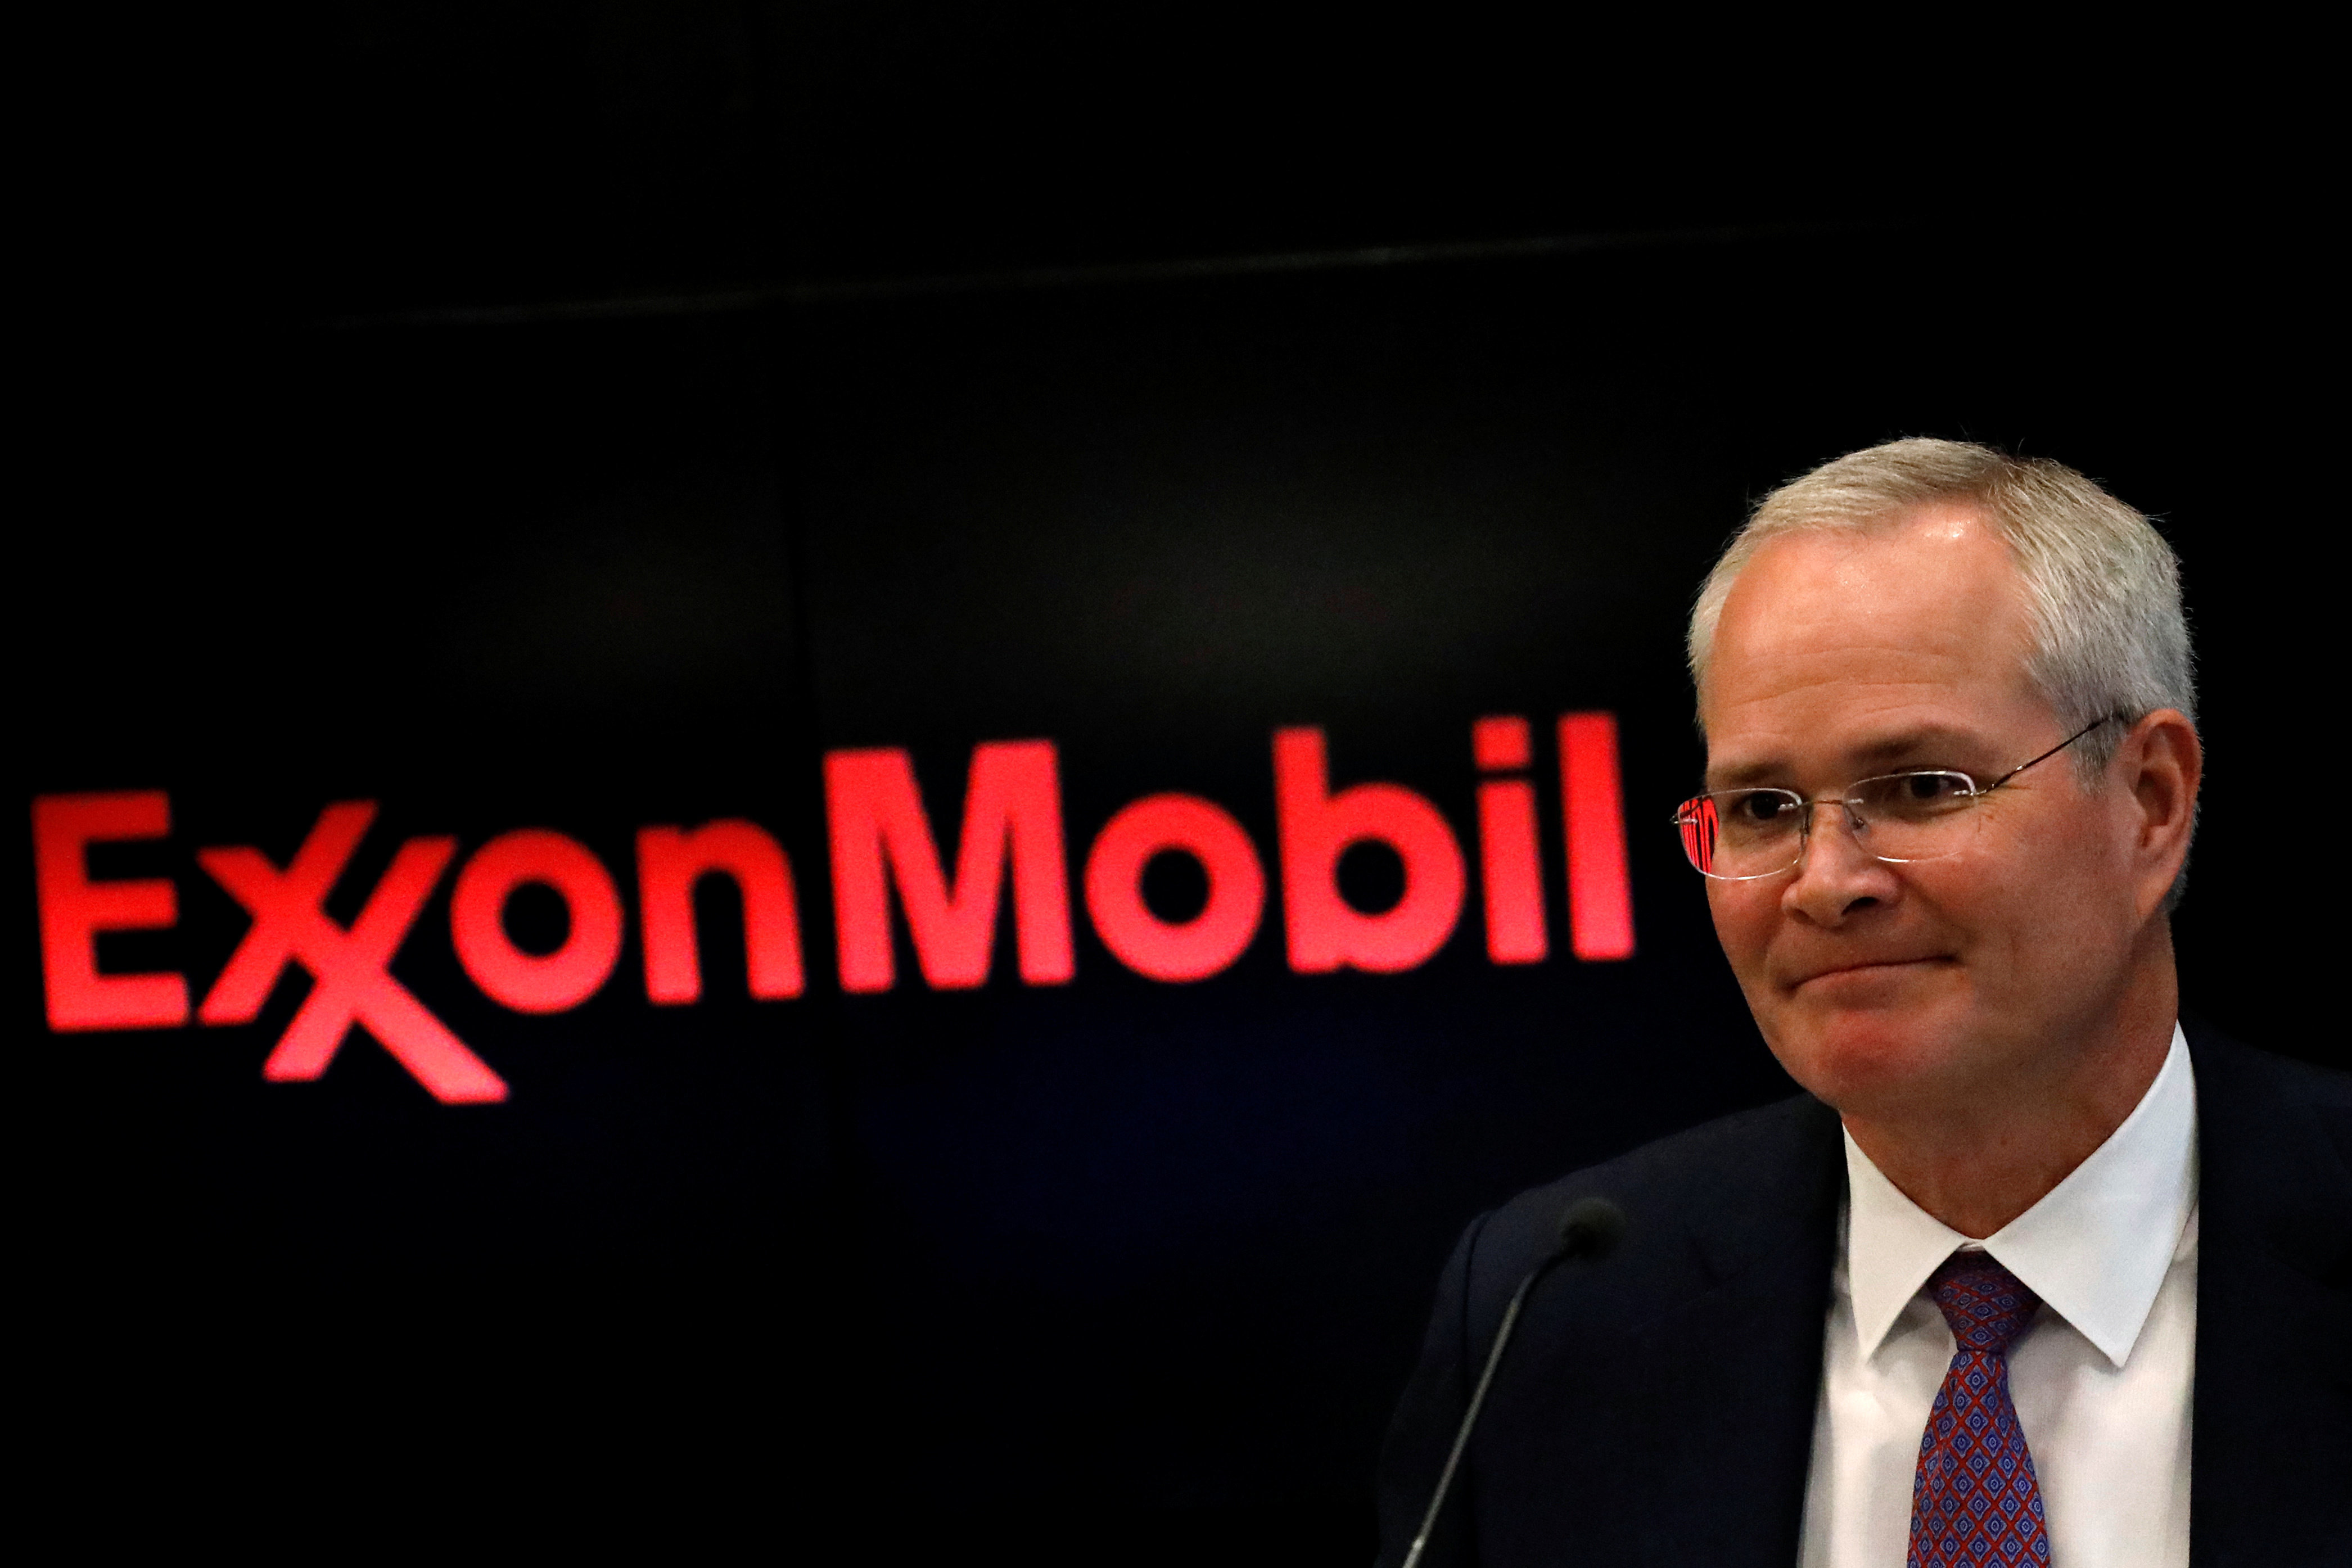 Brendan Mc Dermid  Reuters
Darren Woods chairman and CEO of Exxon Mobil attends a news conference at the New York Stock Exchange